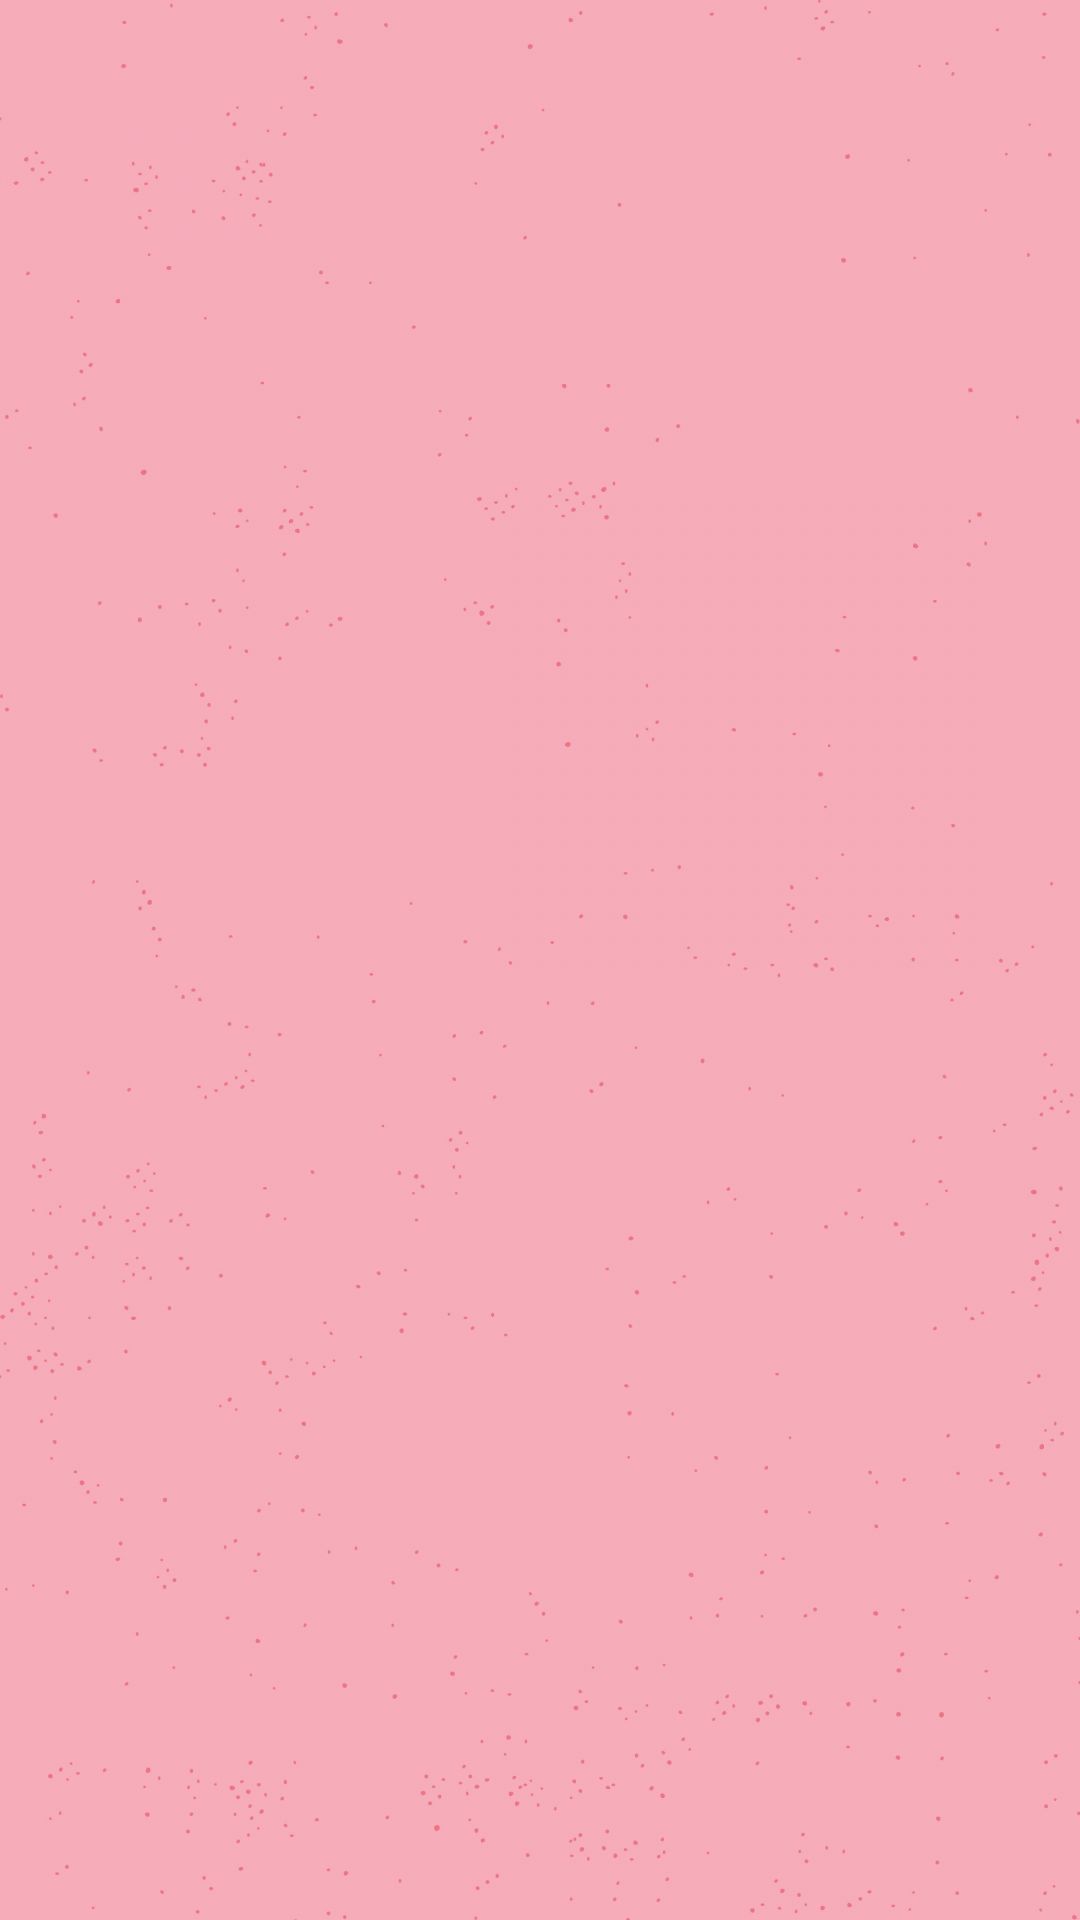 Light pink color wallpapers